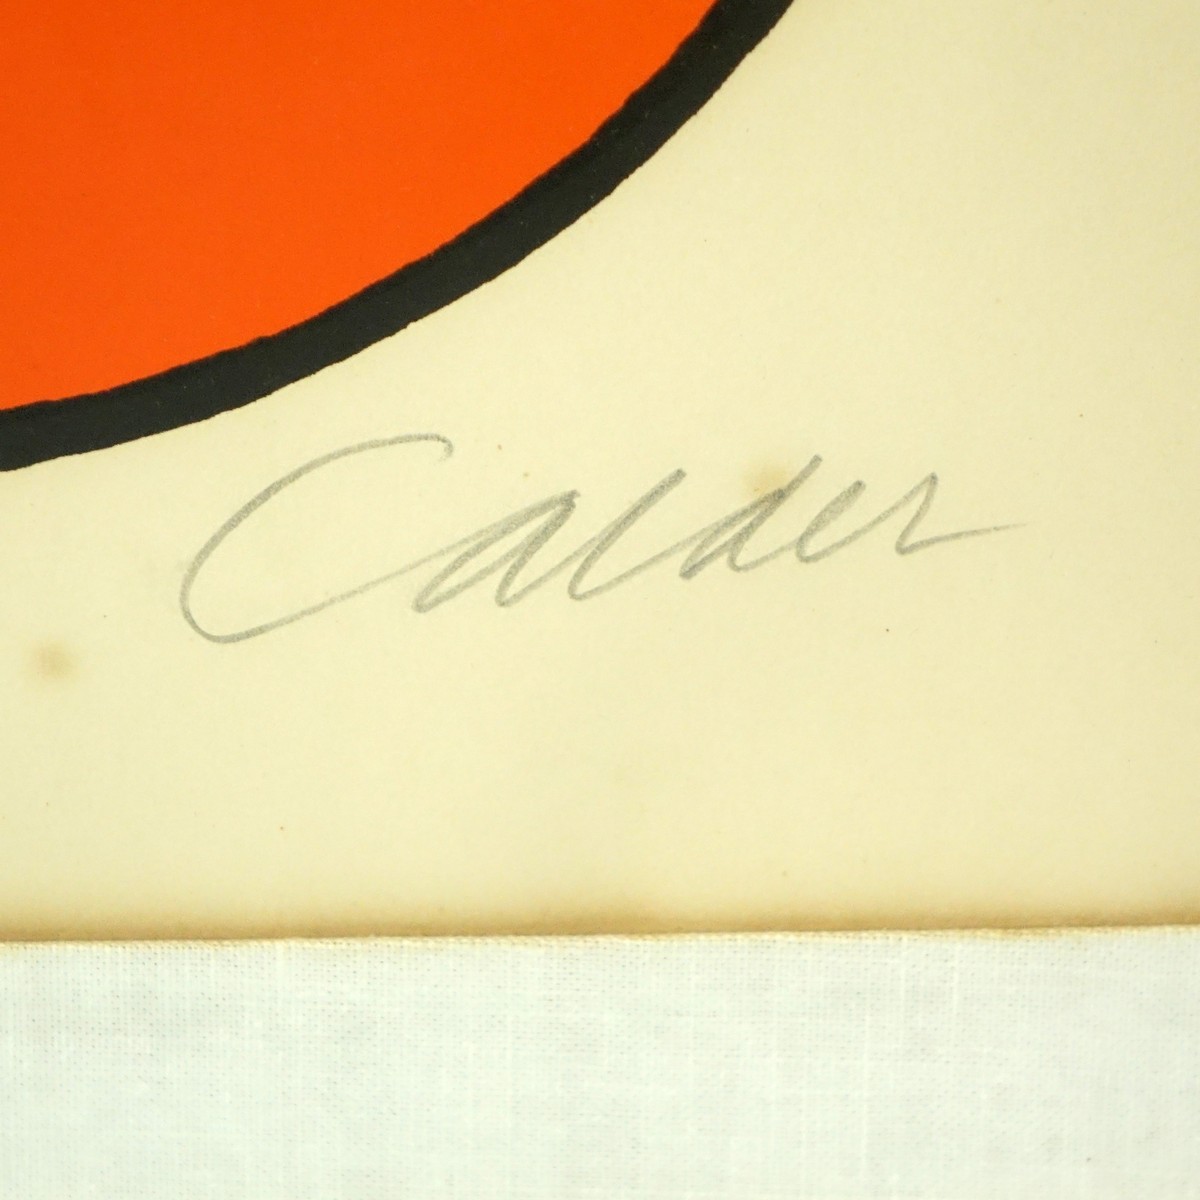 Alexander (Sandy) Calder, American (1898 - 1976) Color lithograph "Spirale Et Poulee". Signed in pencil and numbered 24/75, gallery label" Far Gallery, New York.